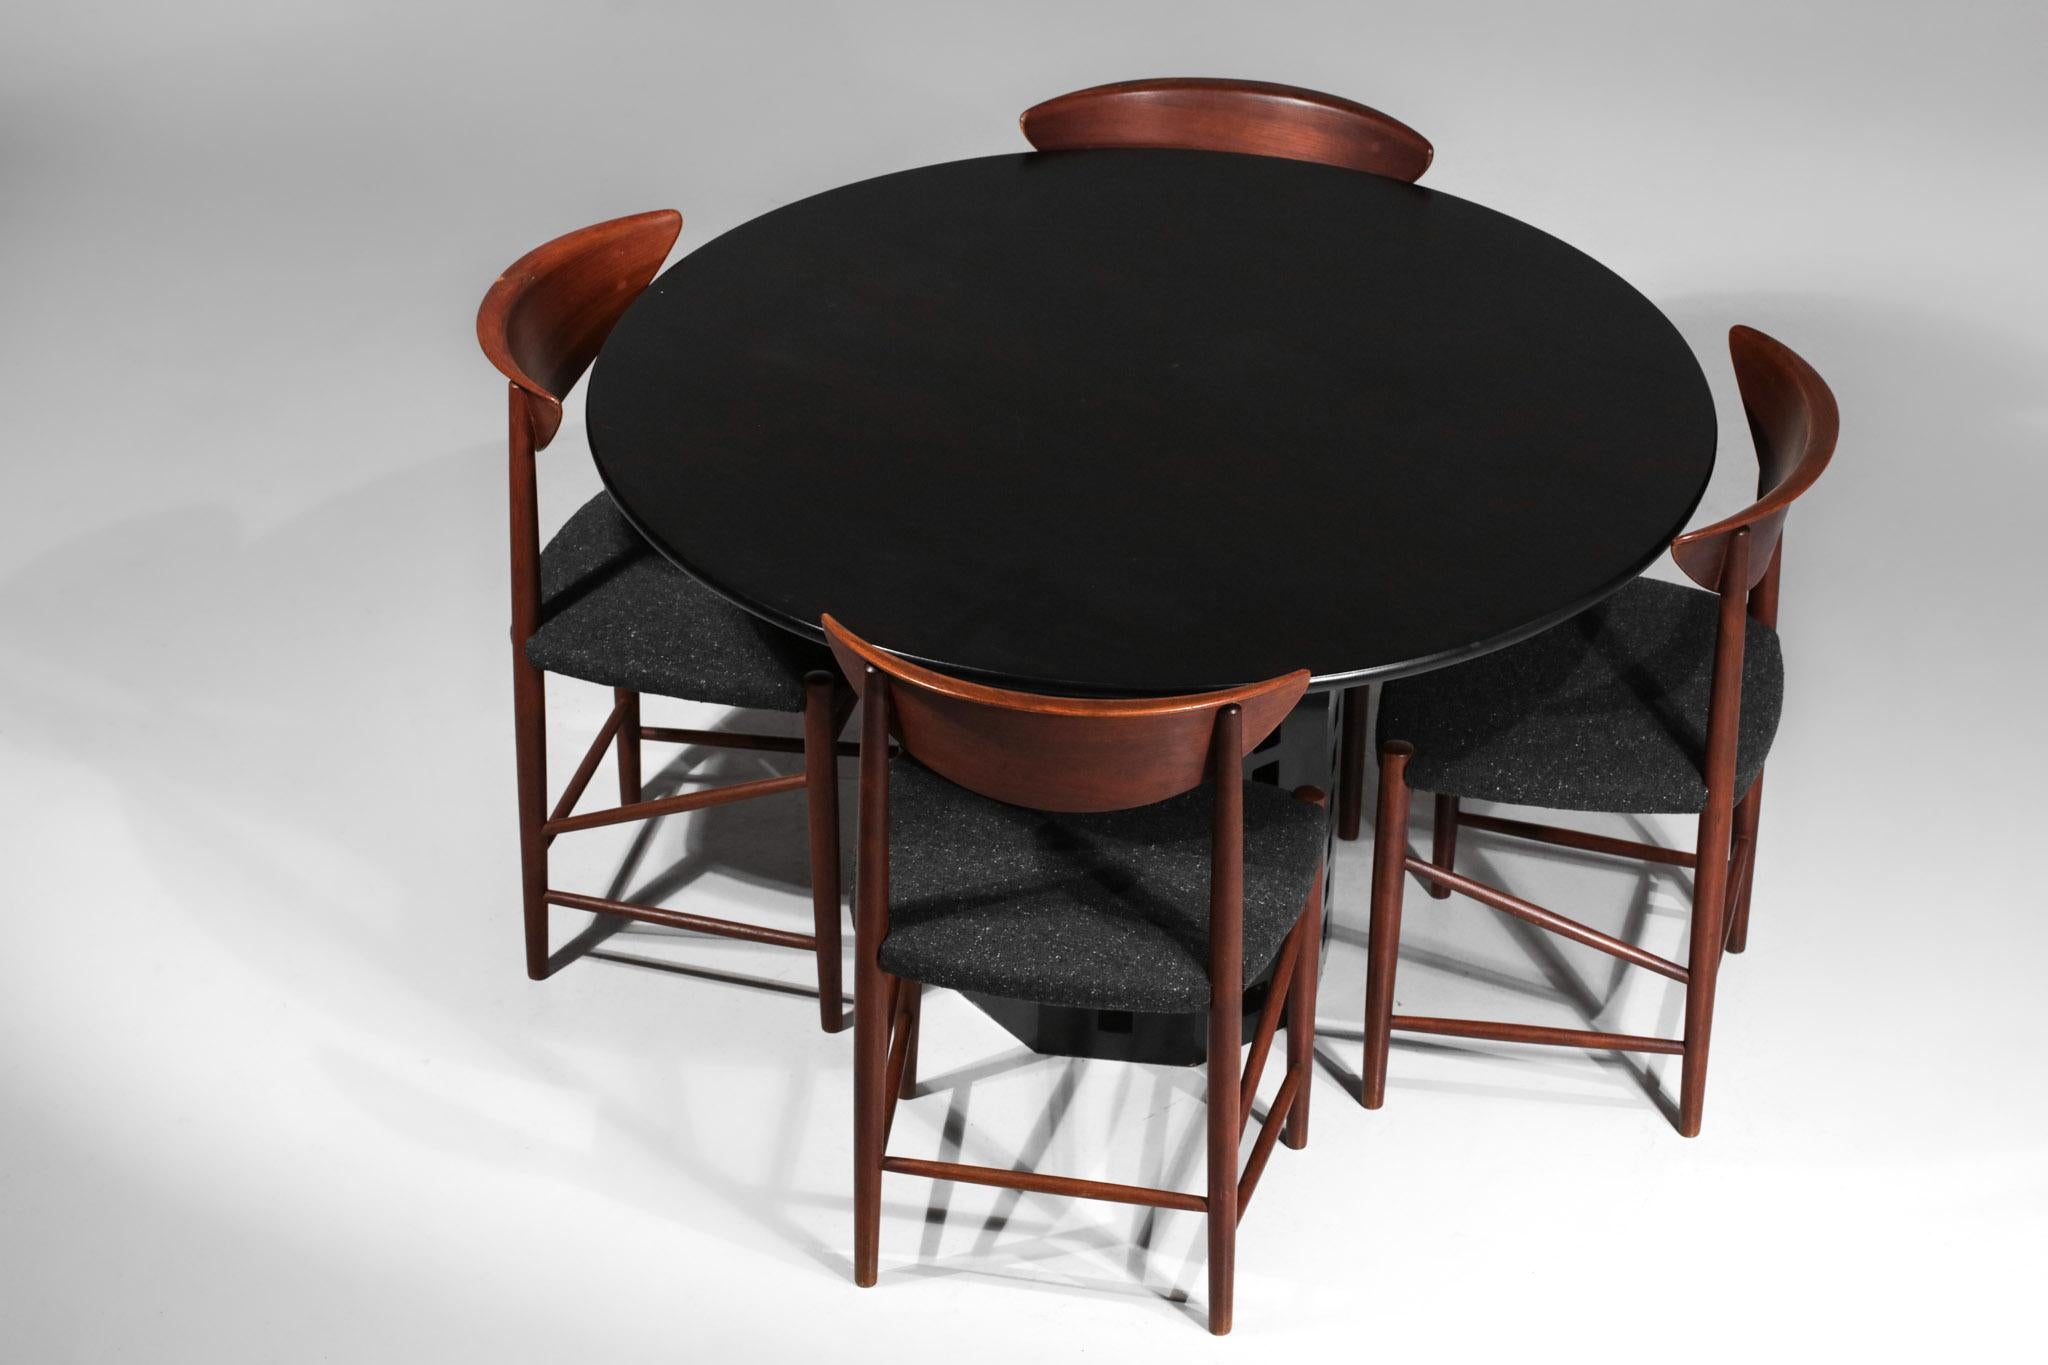 Joseph Hoffman Dining Table Reissue 70's Lacquered Wood - G046 For Sale 1